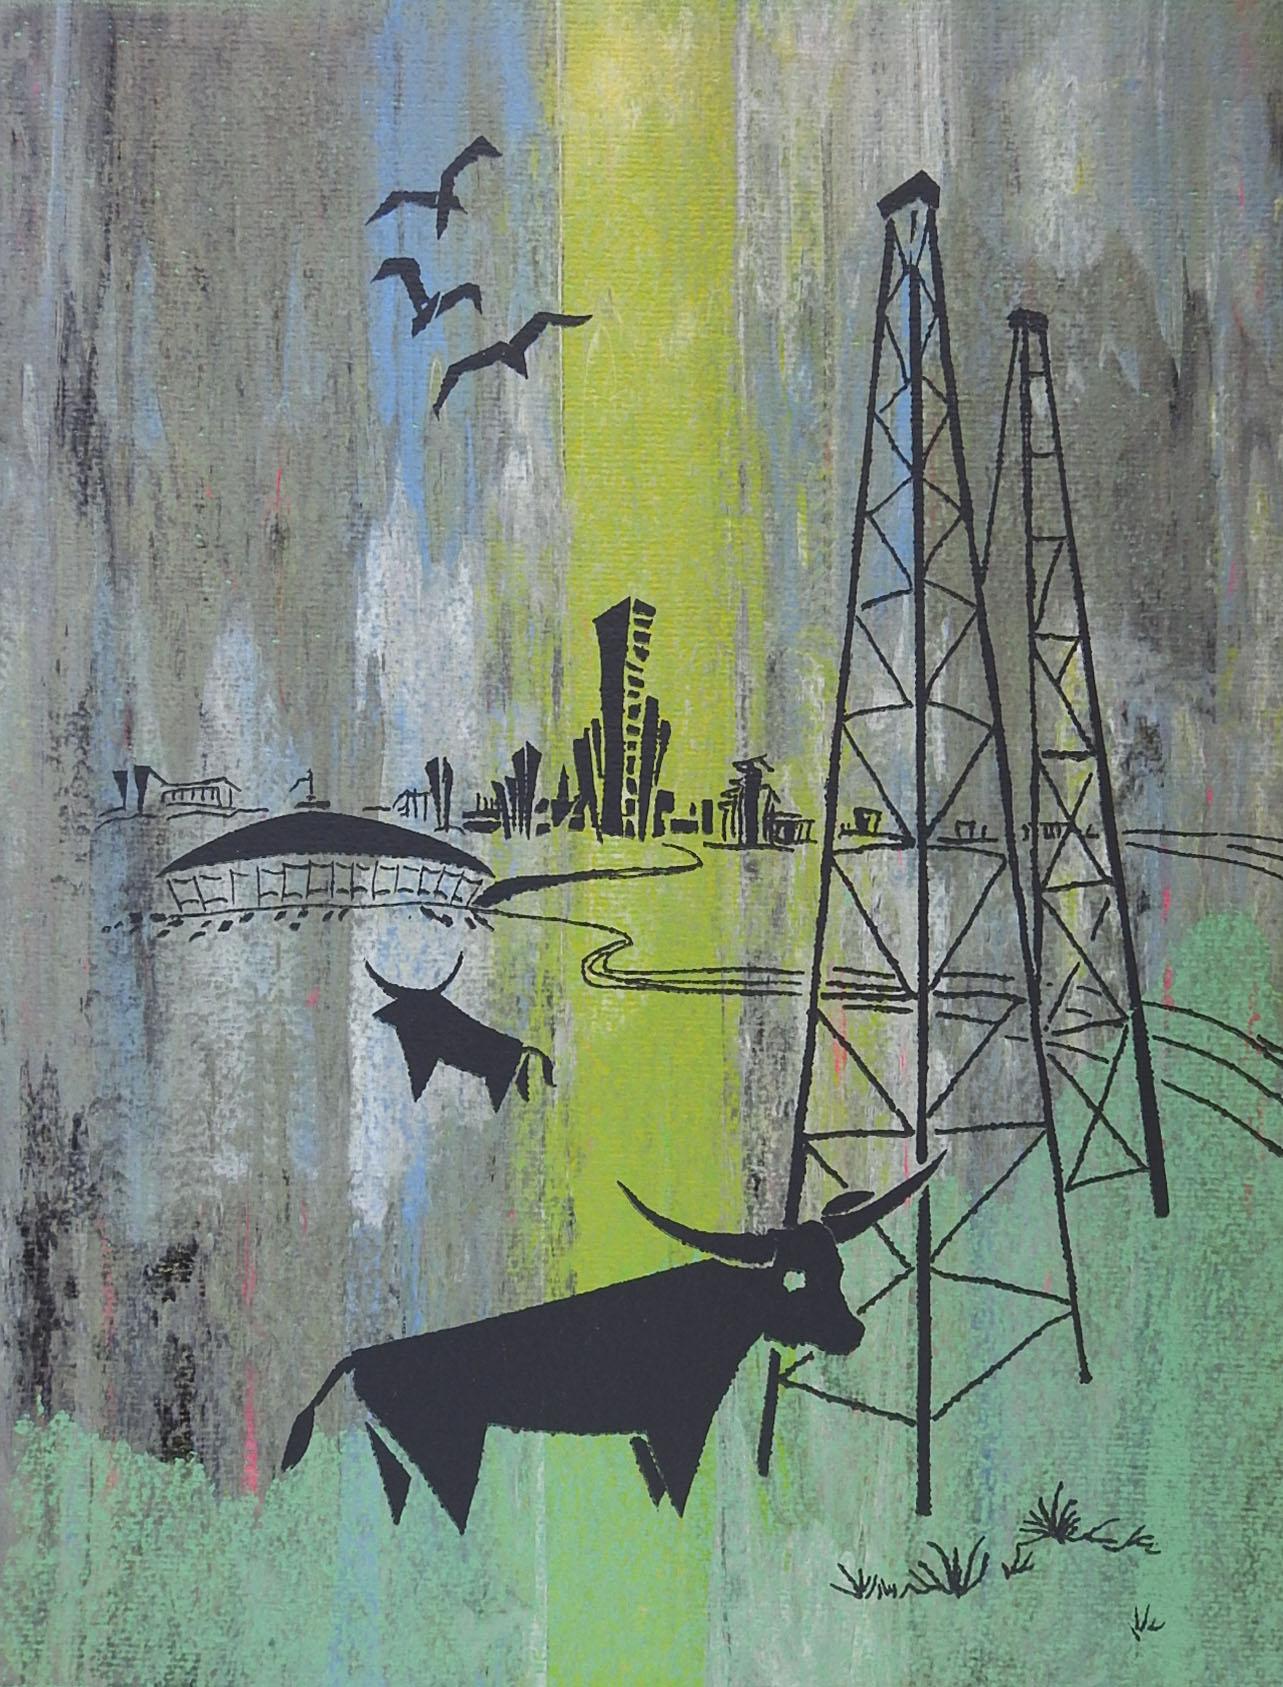 Vintage mid-20th century serigraph on paper of Houston Astro Dome, oil wells and longhorn cattle. Images in black over yellow, green & turquoise hand colored paper. We have several color variation of this same image listed. Unsigned. Unframed.